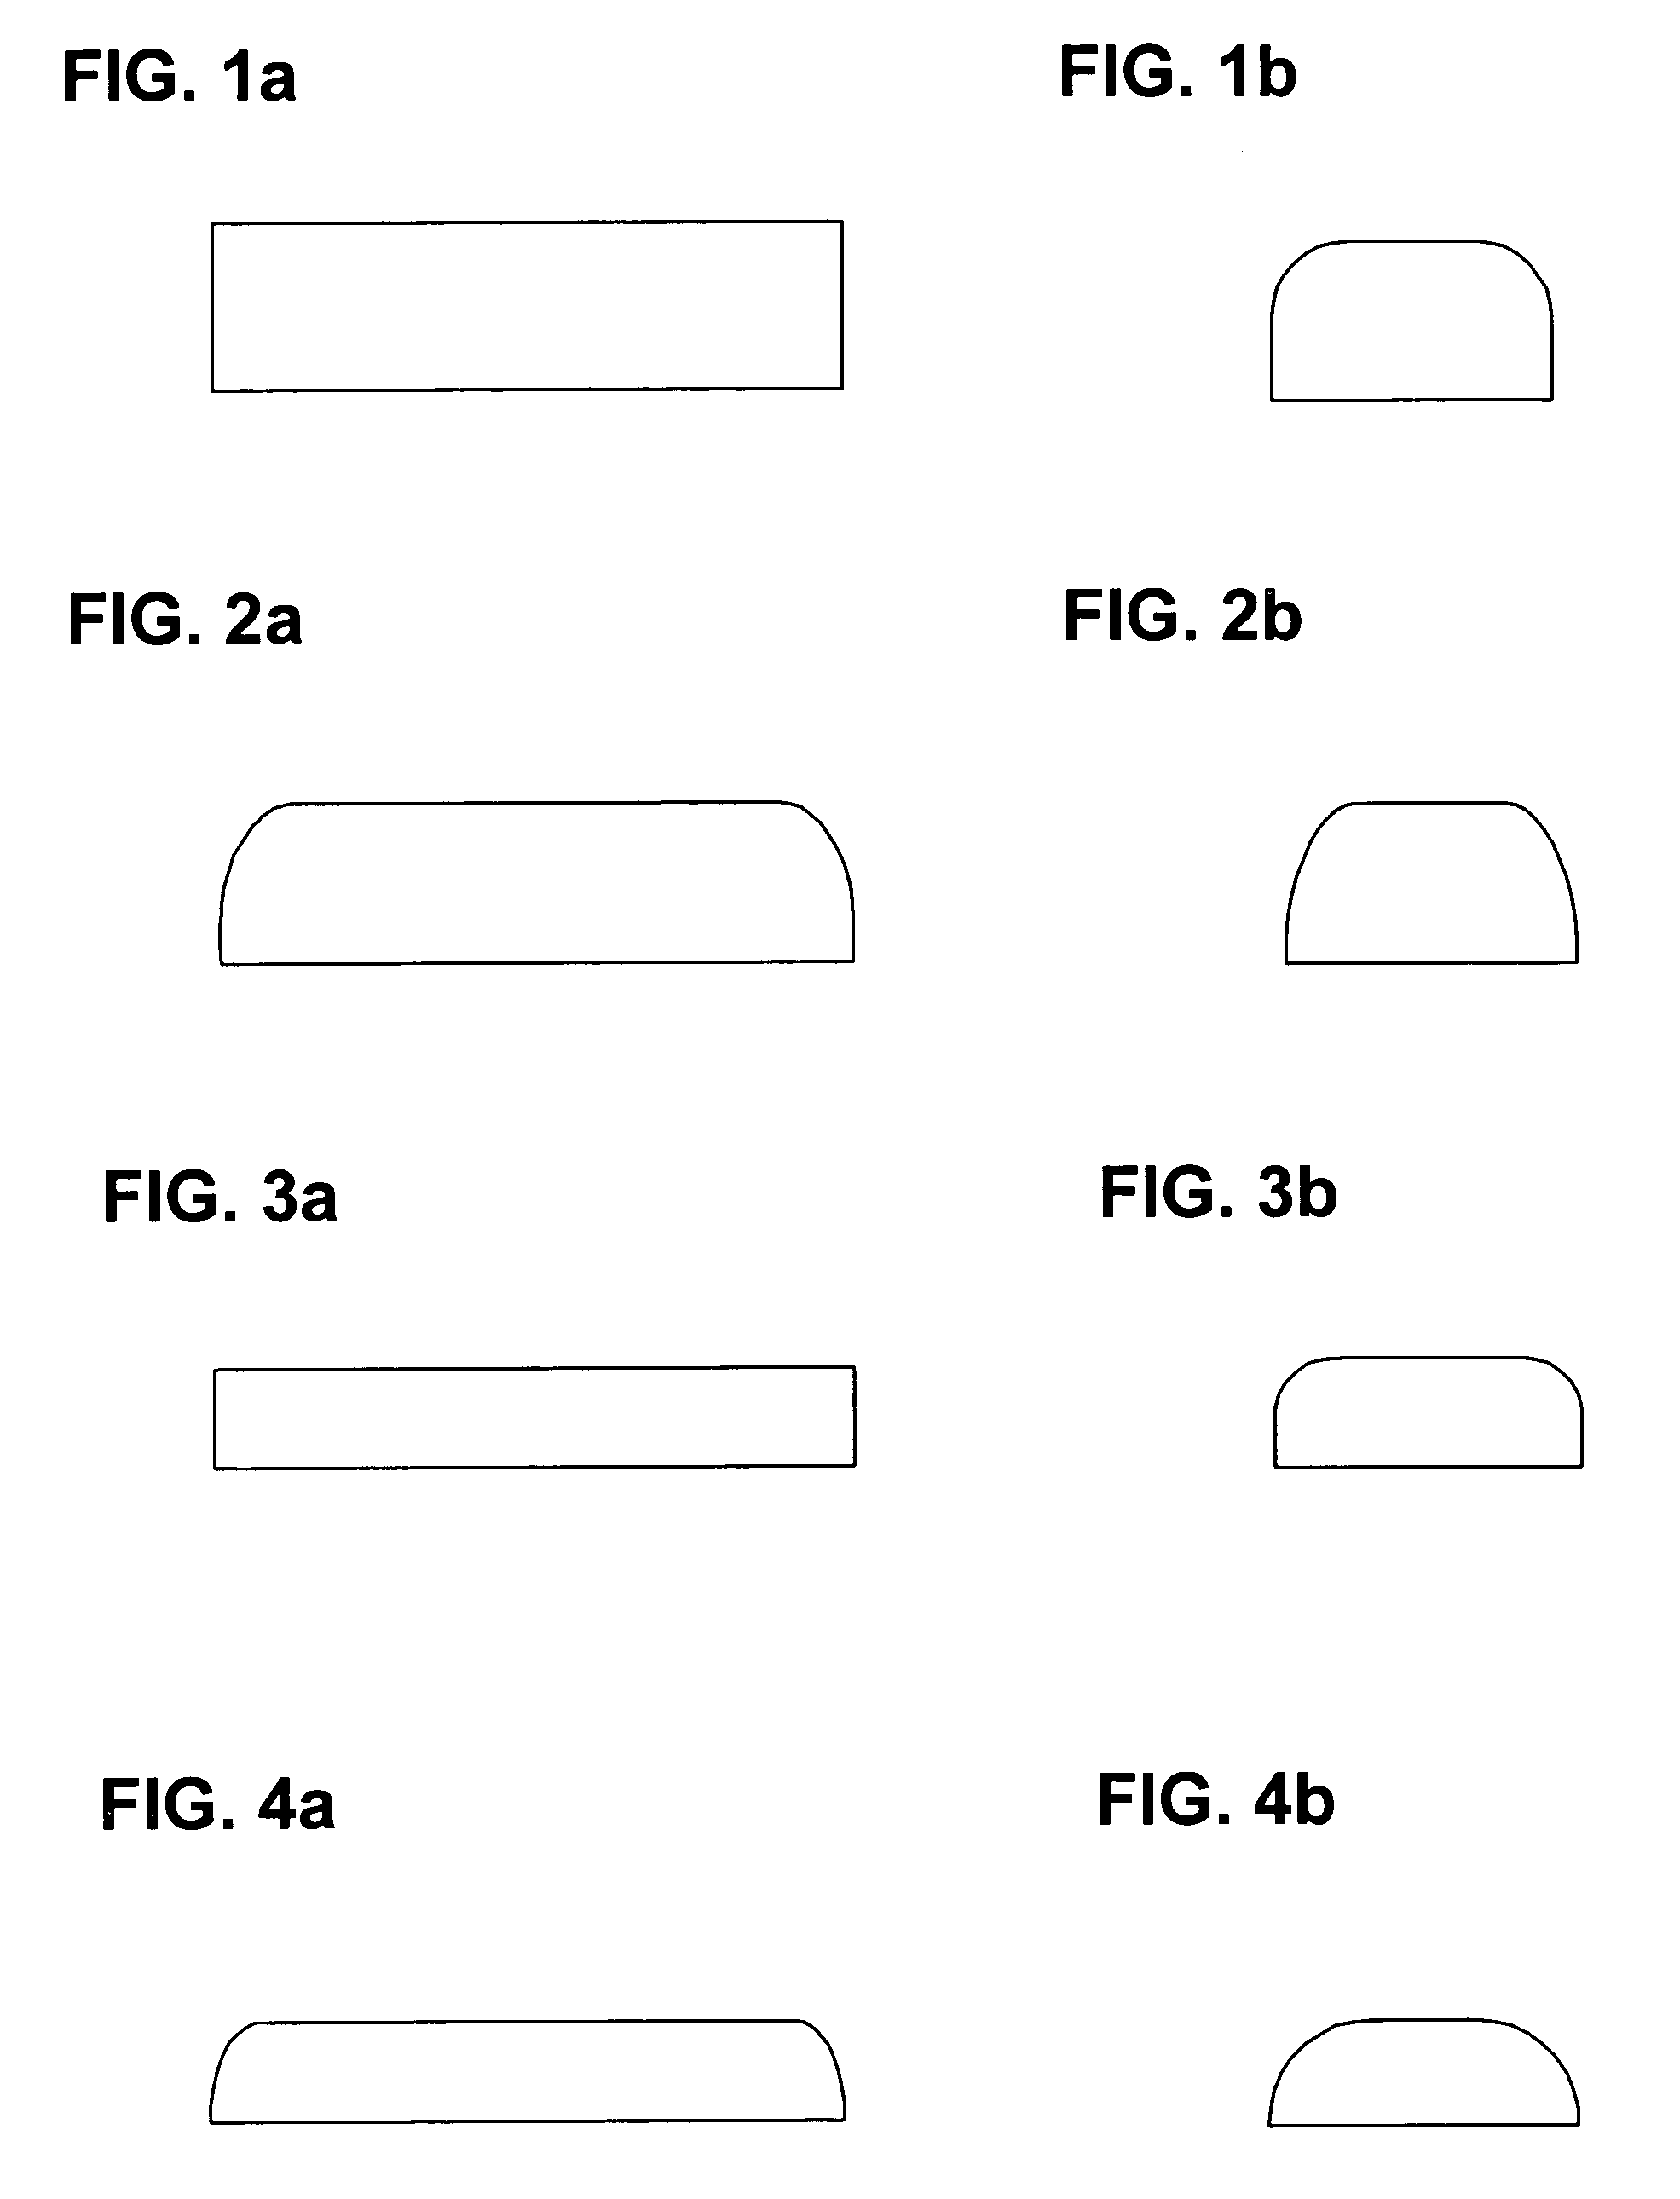 Fabric treatment compositions and methods for treating fabric in a dryer